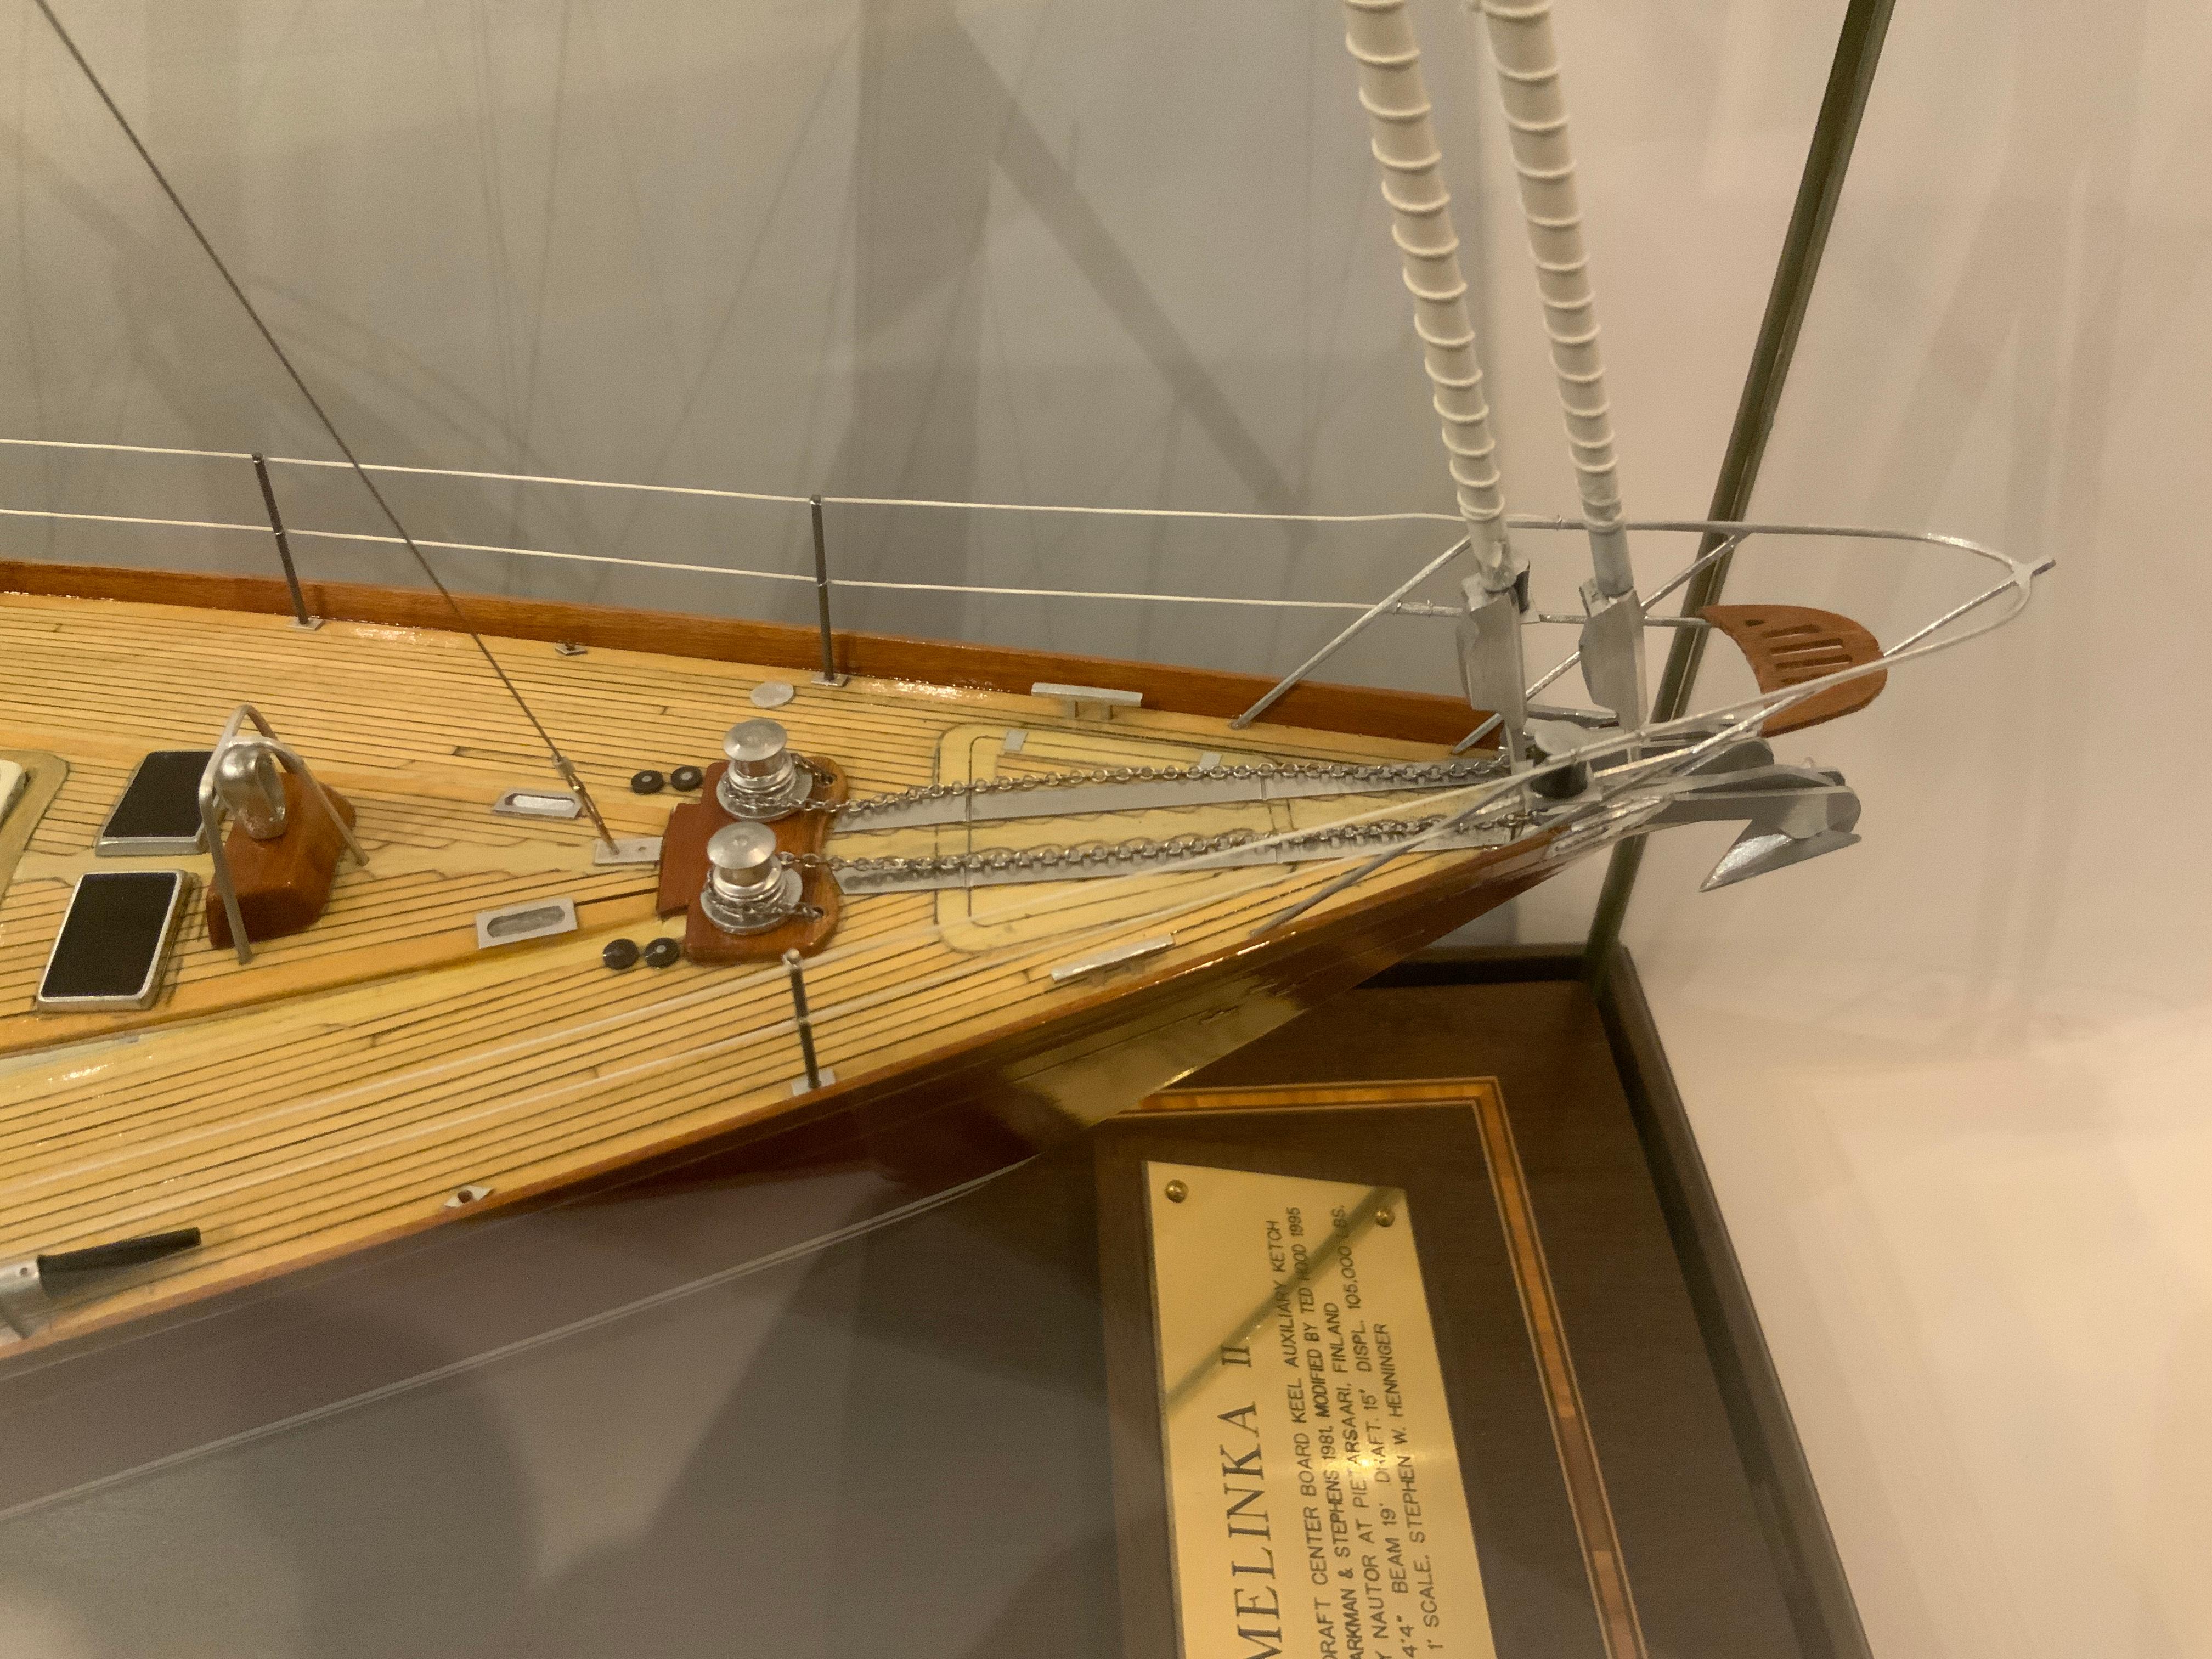 A fine Vincent Castello model of the famous, 1983 winner skippered by Dennis Conner.
Presented in wood and glass case.
Measures: 42 x 33-1/2 x 11 inches (106.7 x 85.1 x 27.9 cm).